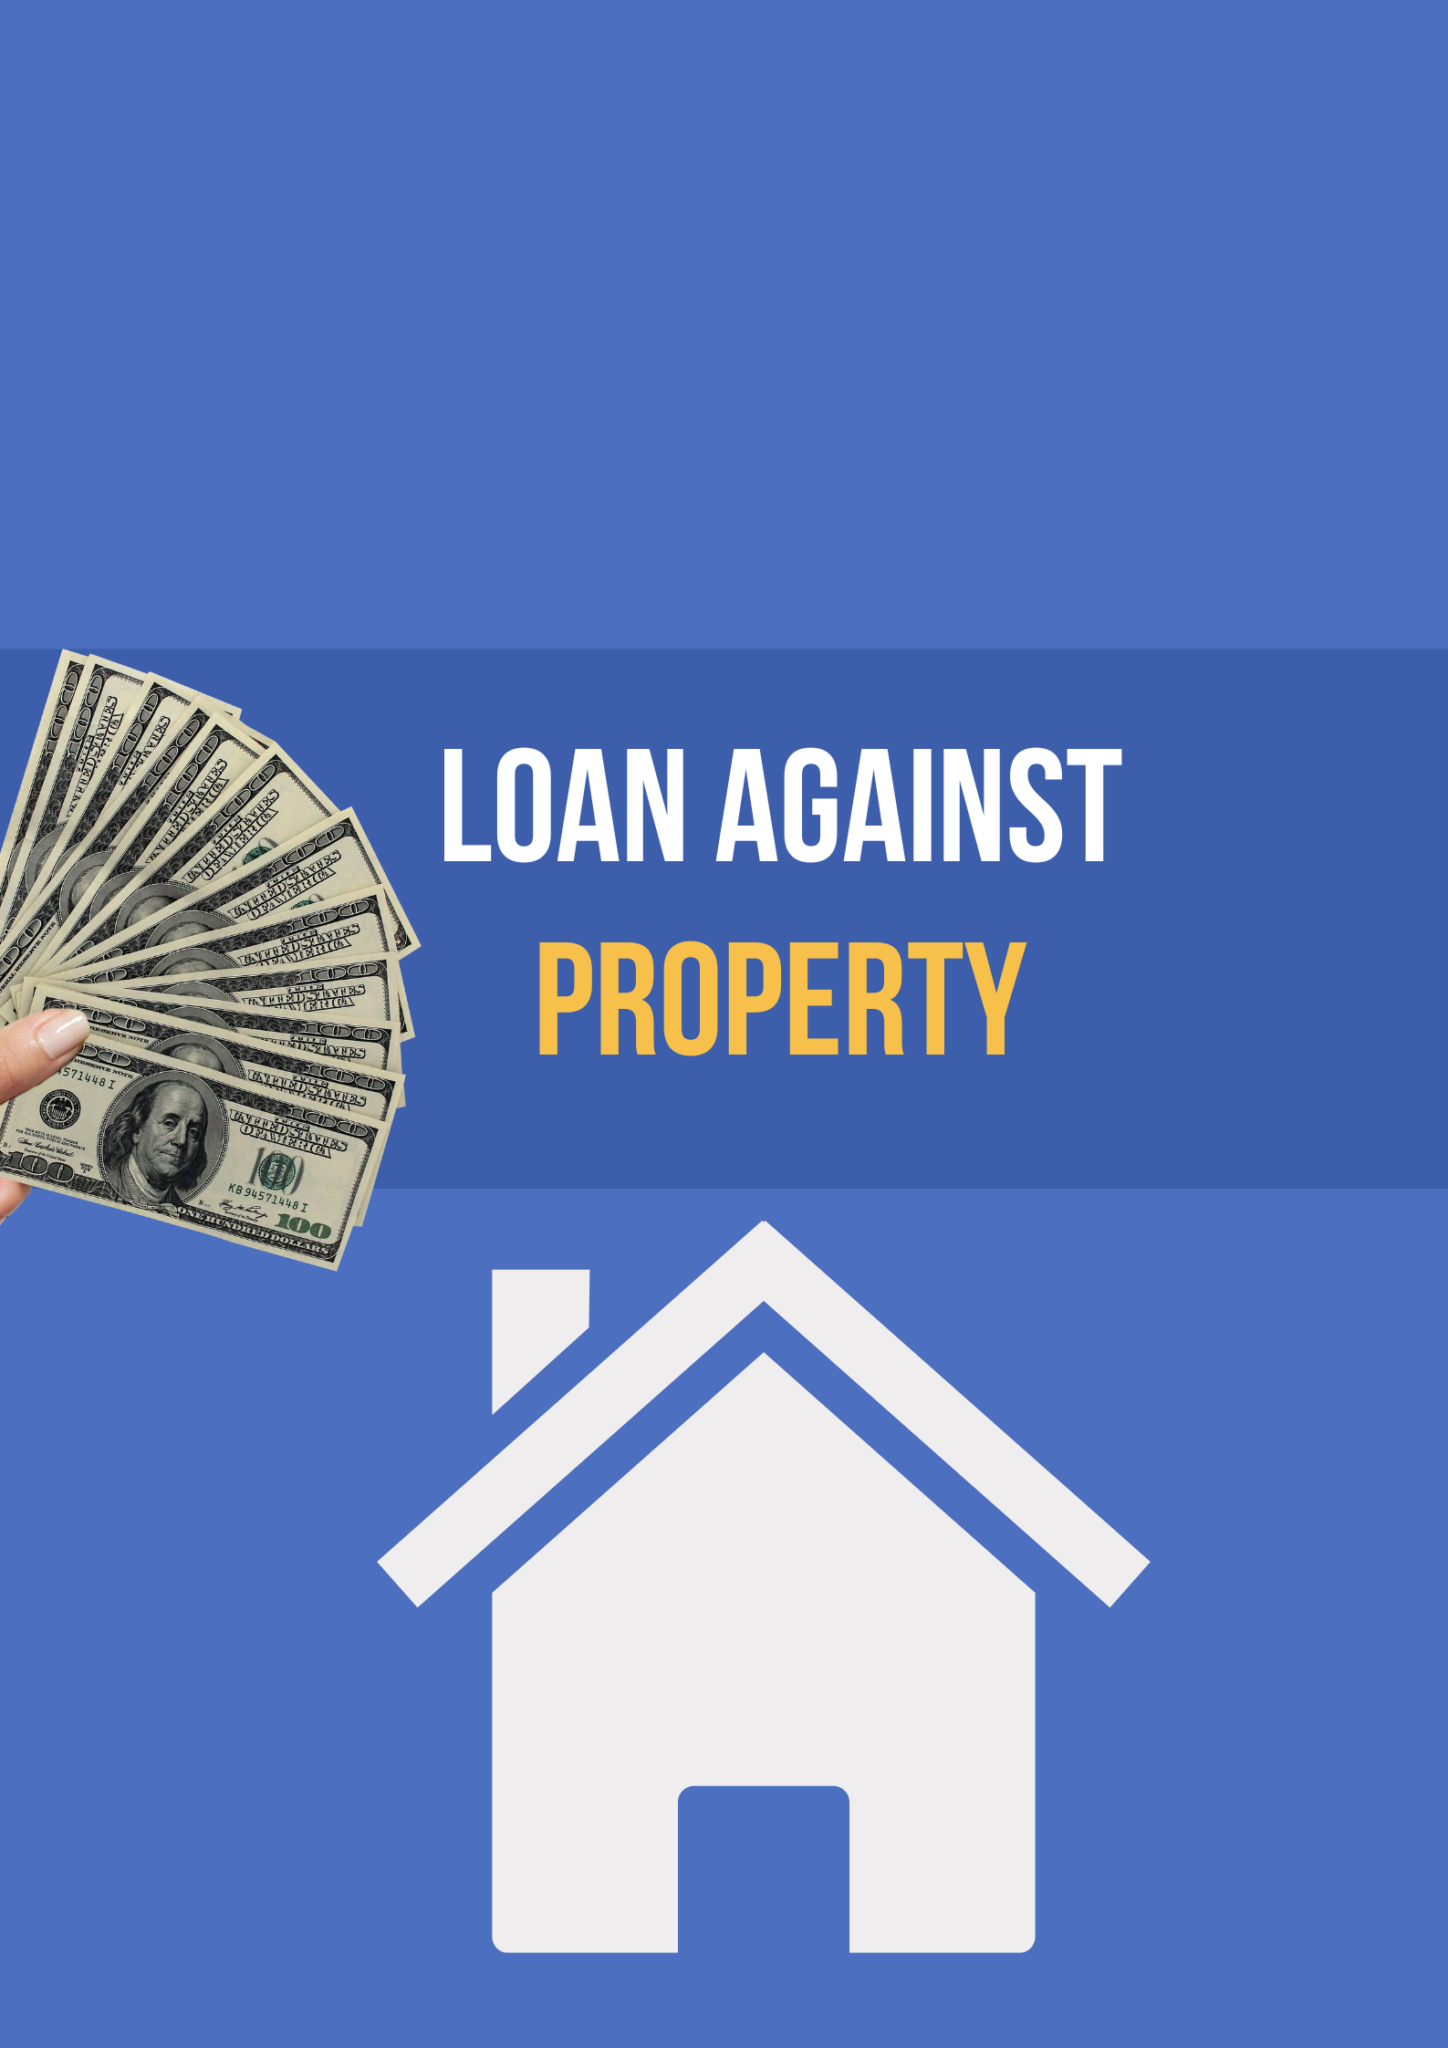 apply-loan-against-property-directly-documents-required-for